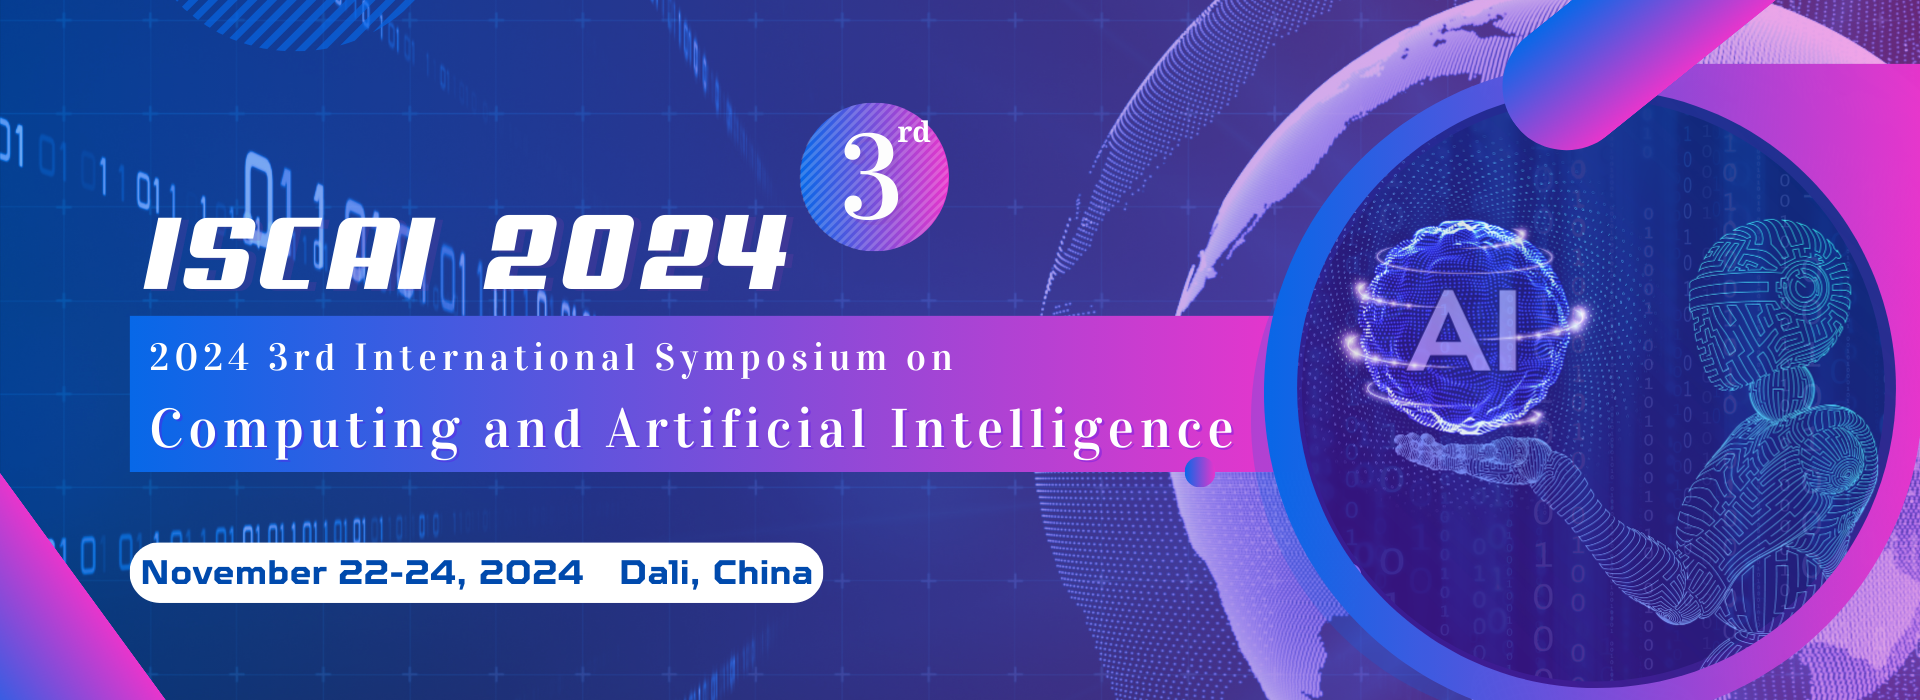 2024 3rd International Symposium on Computing and Artificial Intelligence (ISCAI 2024)